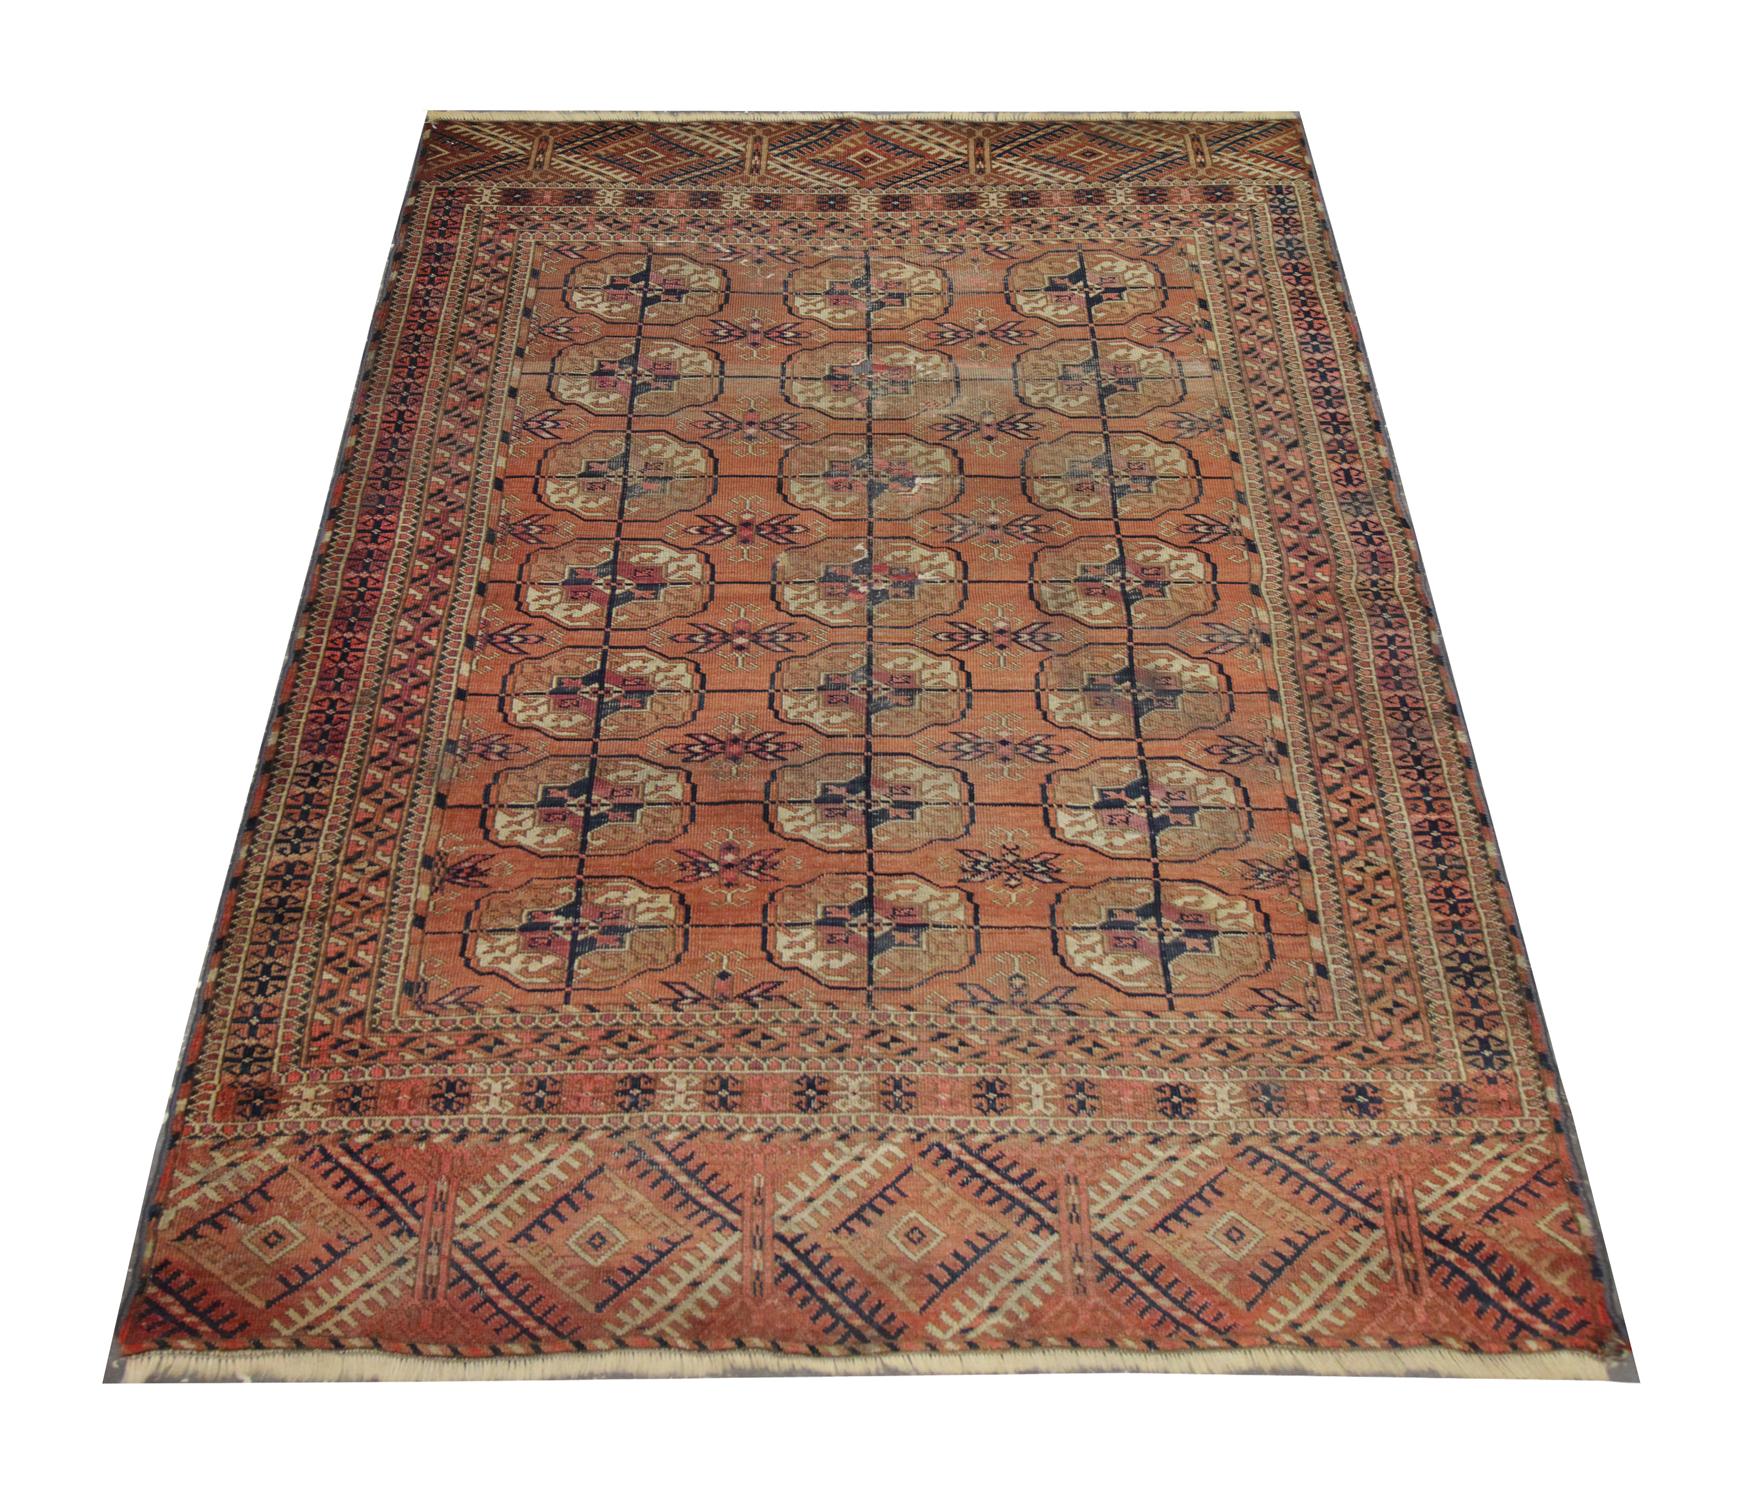 This wool rug is a great example of Bukhara rugs woven in the 1890s. The design features a repeating motif design woven on a rust-orange background with accents of beige, red and blue that make up the medallions through the centre and the repeating